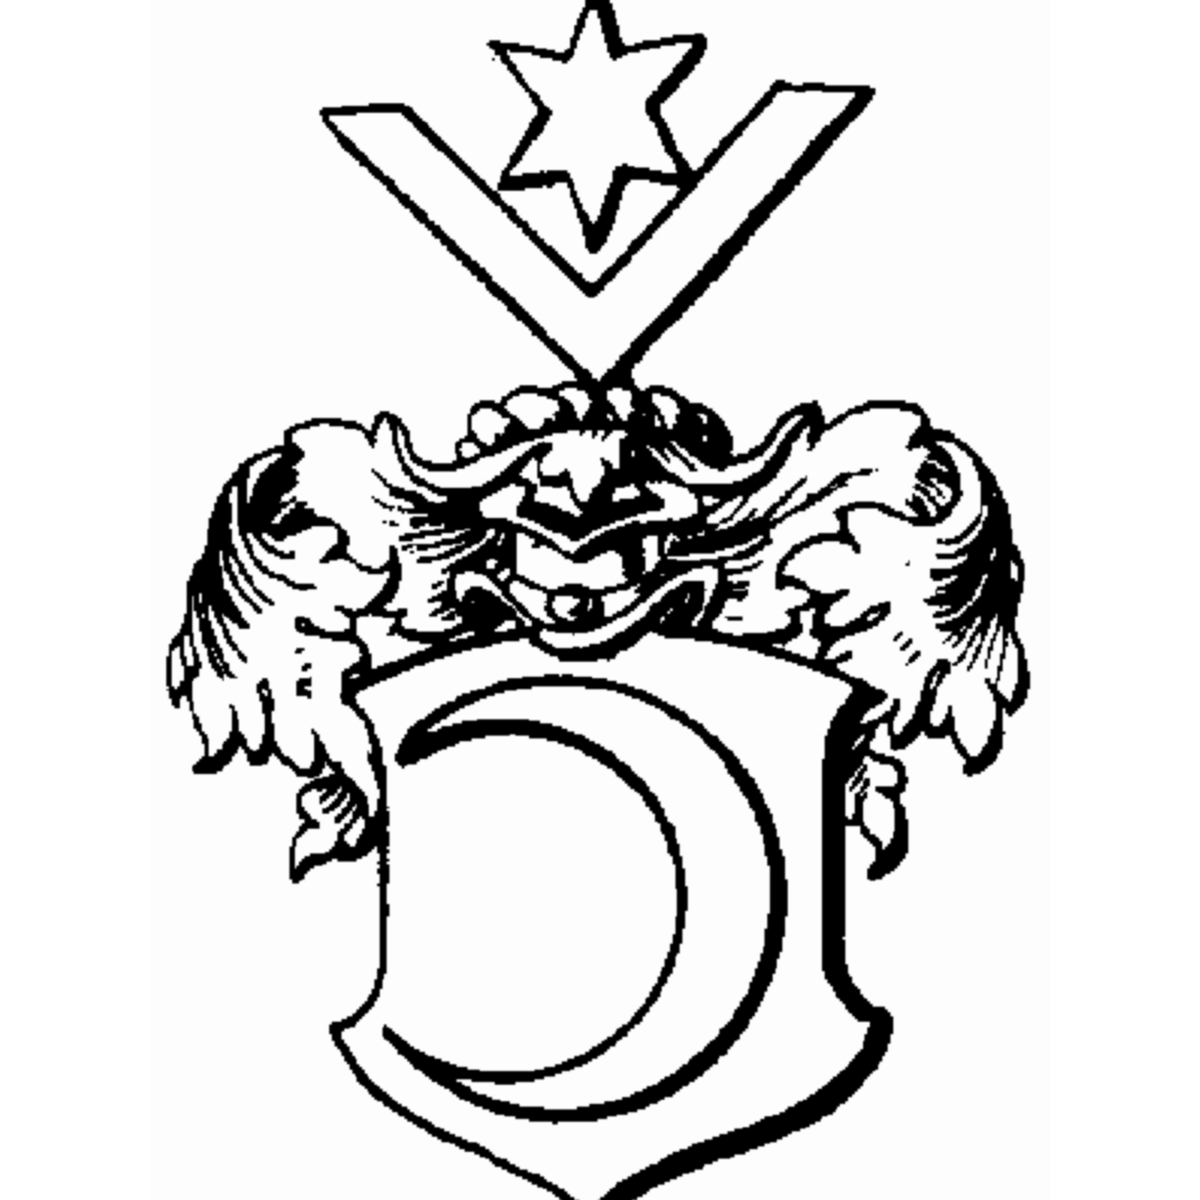 Coat of arms of family Dore